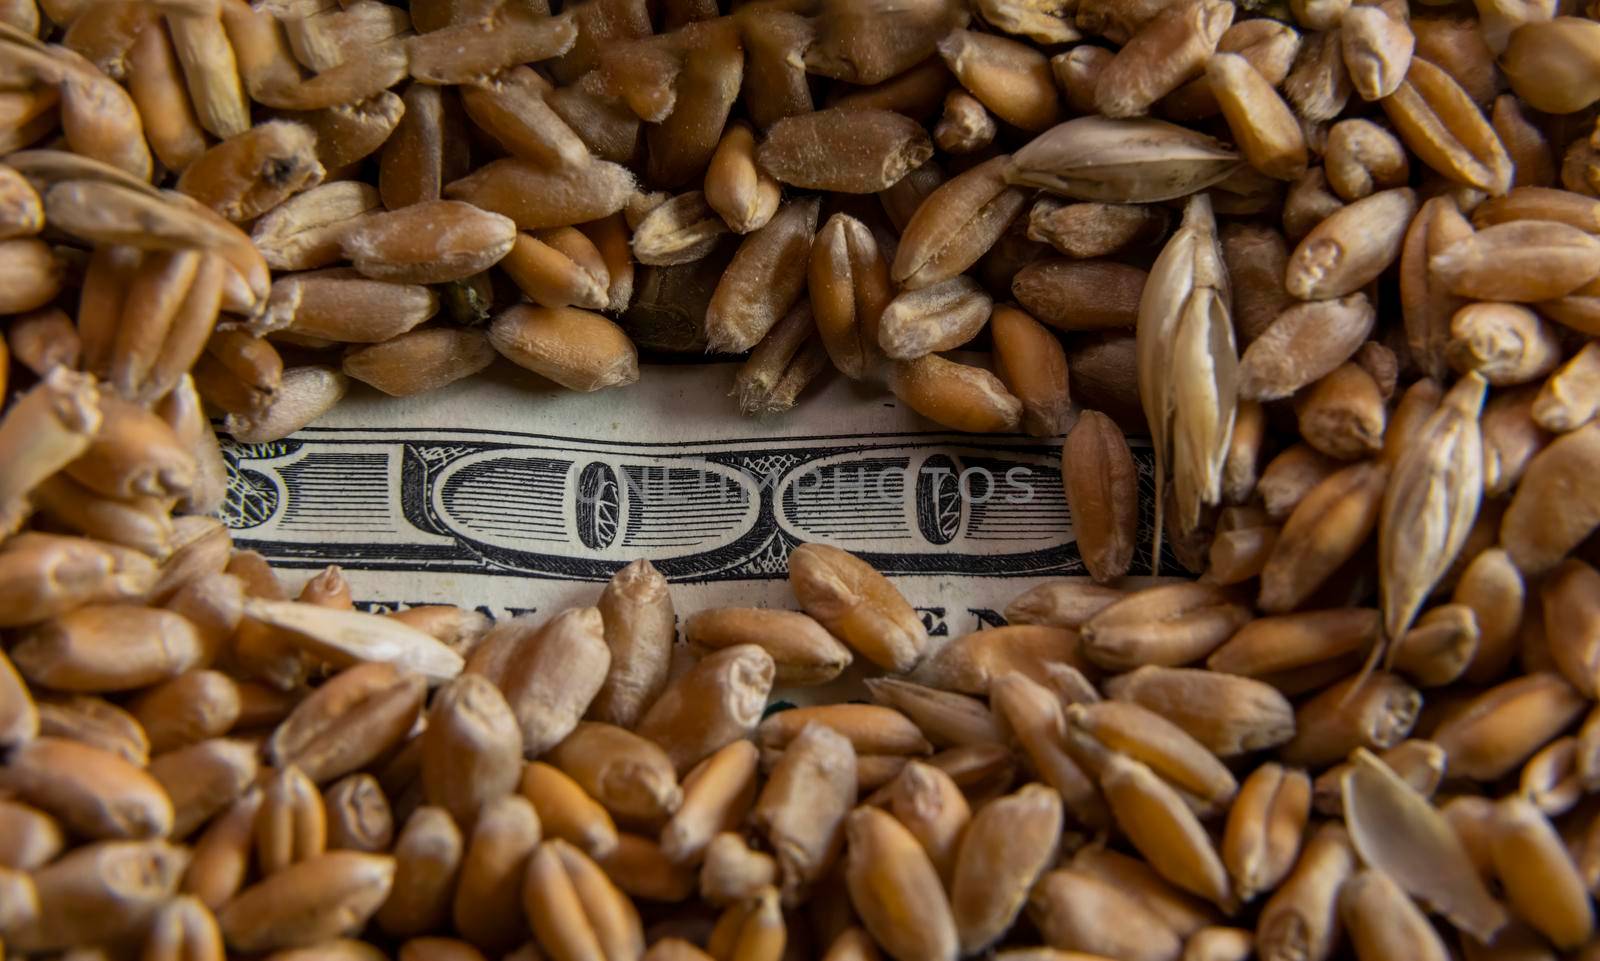 grain of wheat on a hundred dollar bill which is visible only the inscription one hundred